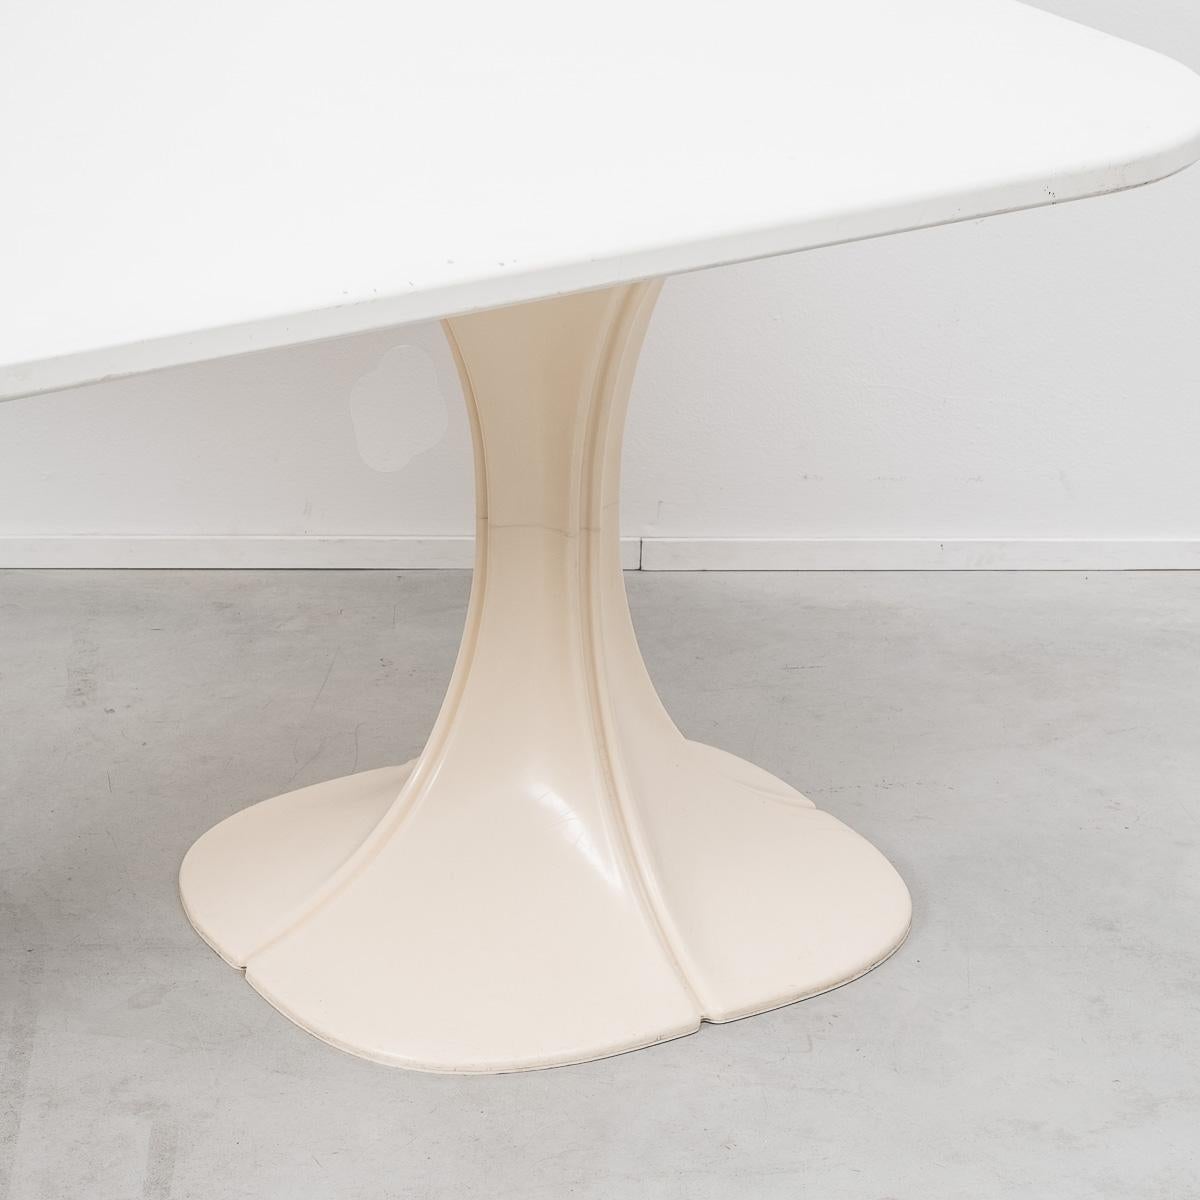 Molded Pierre Paulin 8810 Flower Chair and Table Boro, Beligium, 1970s